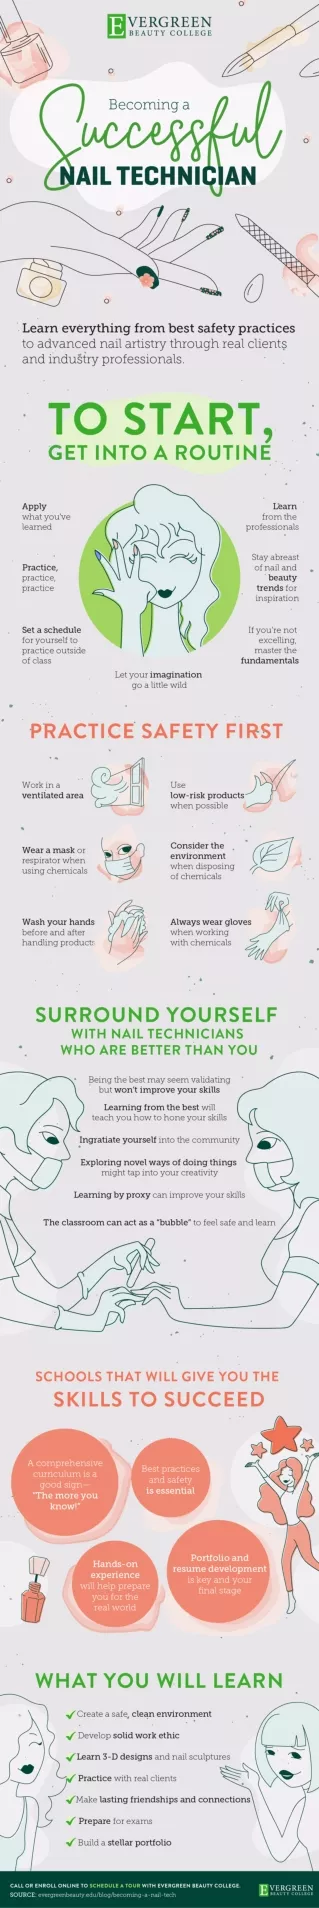 Becoming a Successful Nail Technician